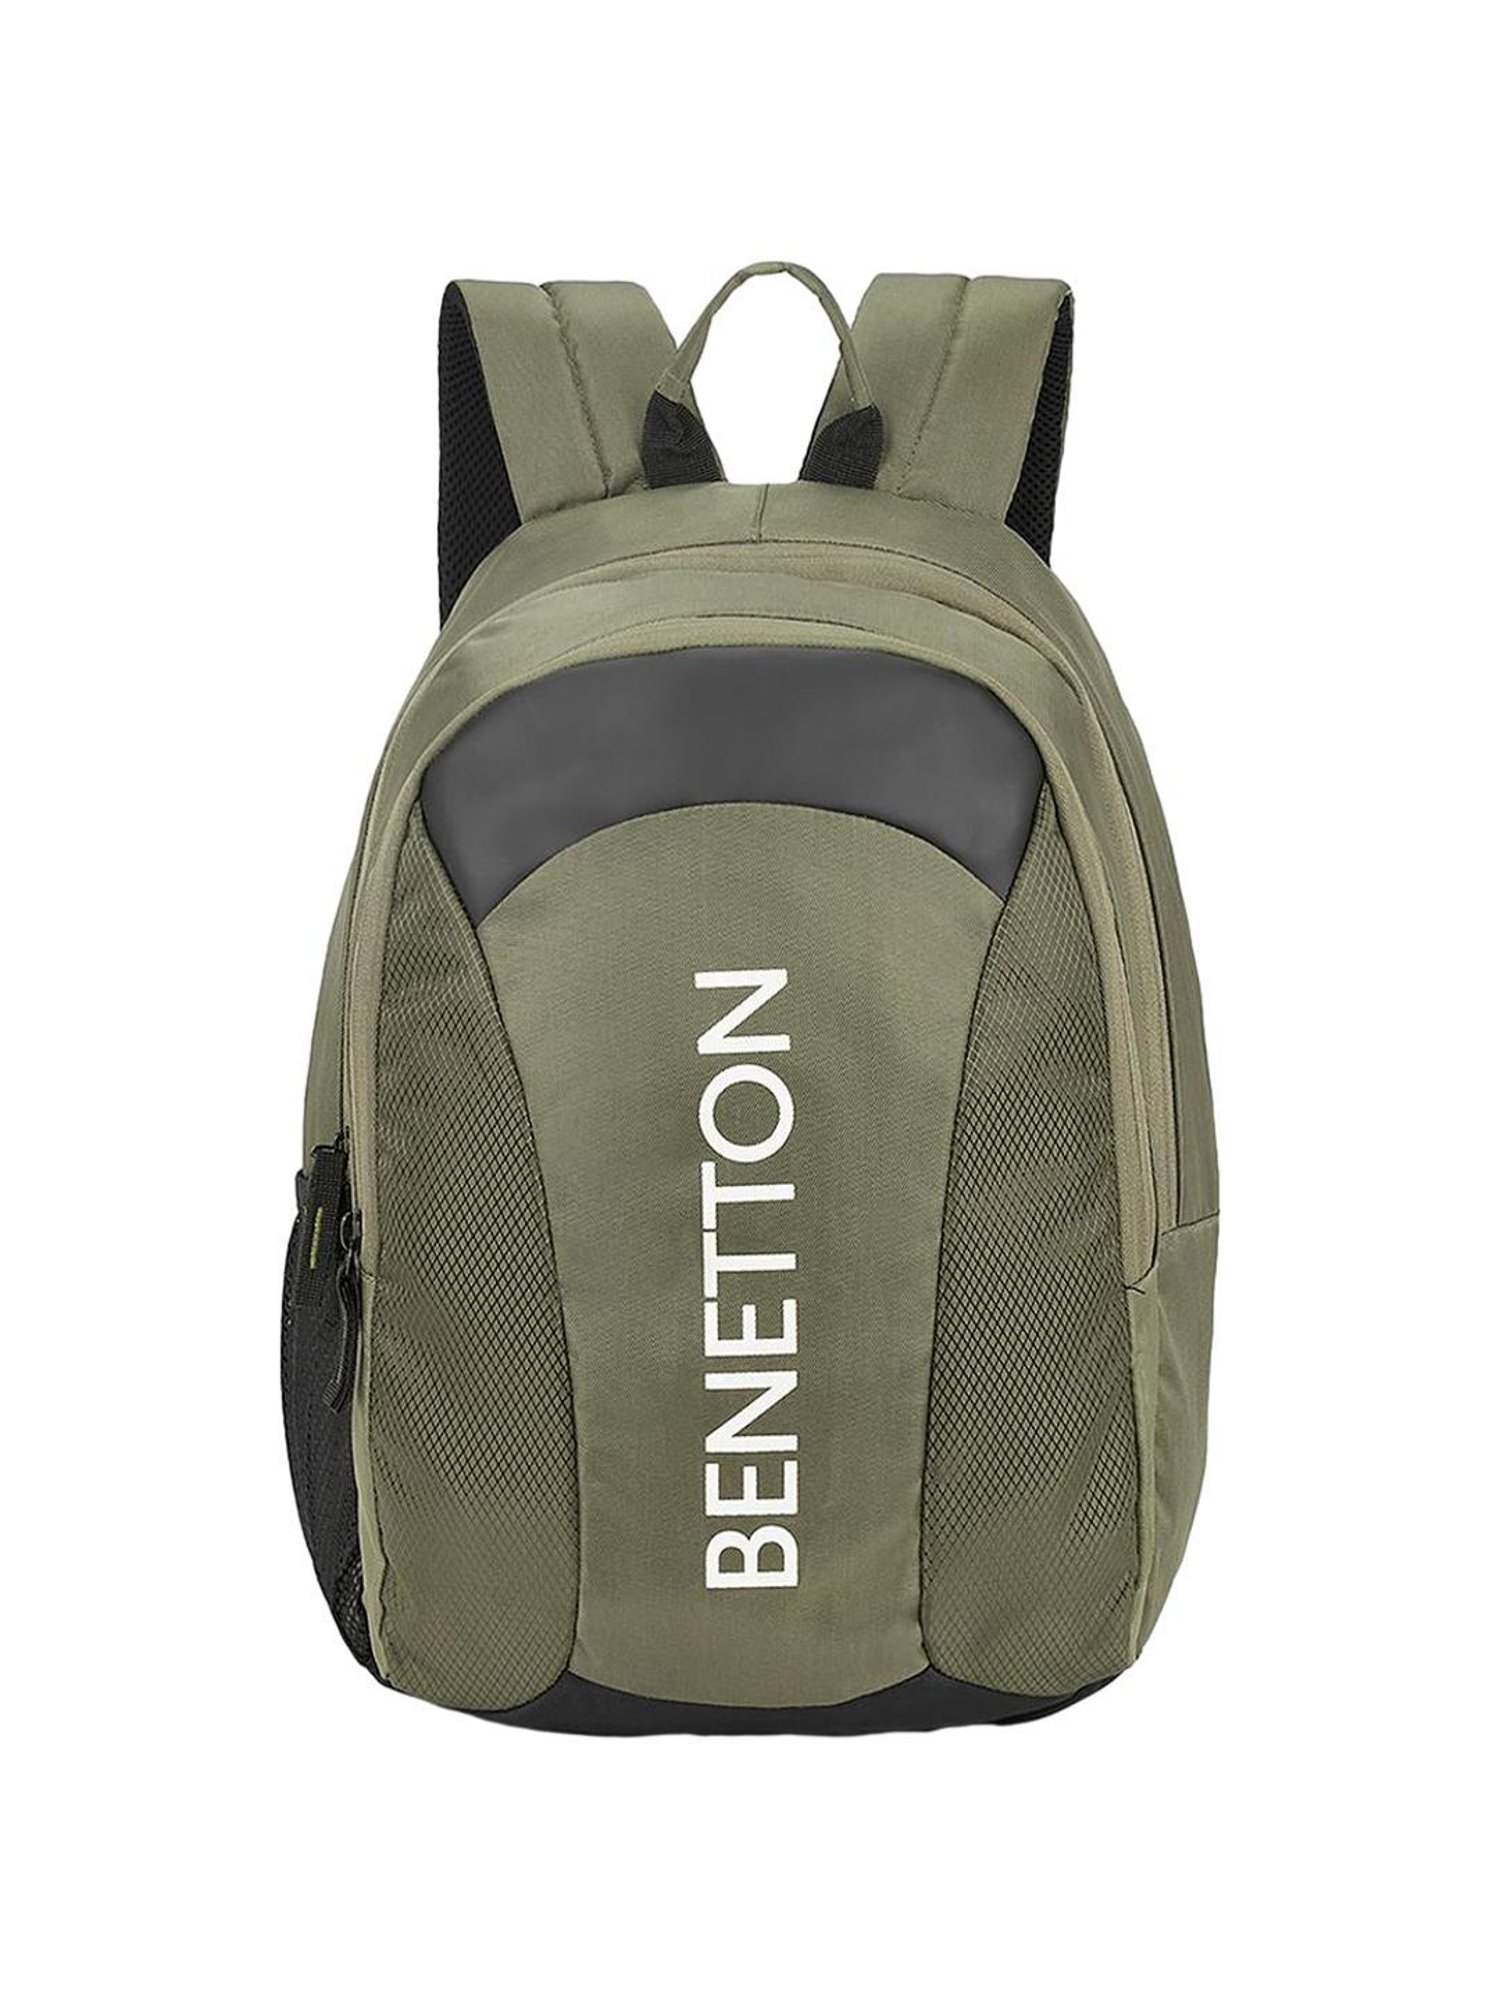 Synthetic 17 United Colors Of Benetton Laptop Bag at Rs 1350 in Faridabad